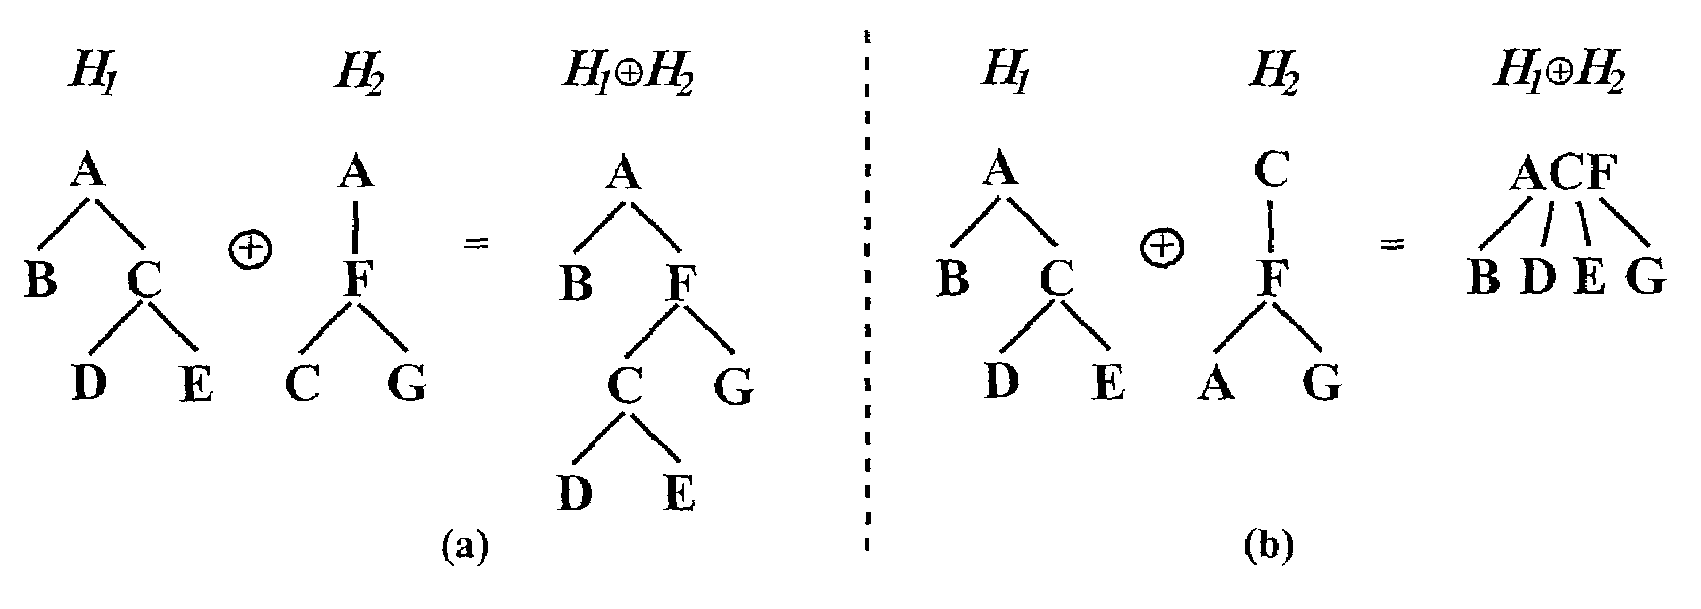 Semantics-based composition of class hierarchies